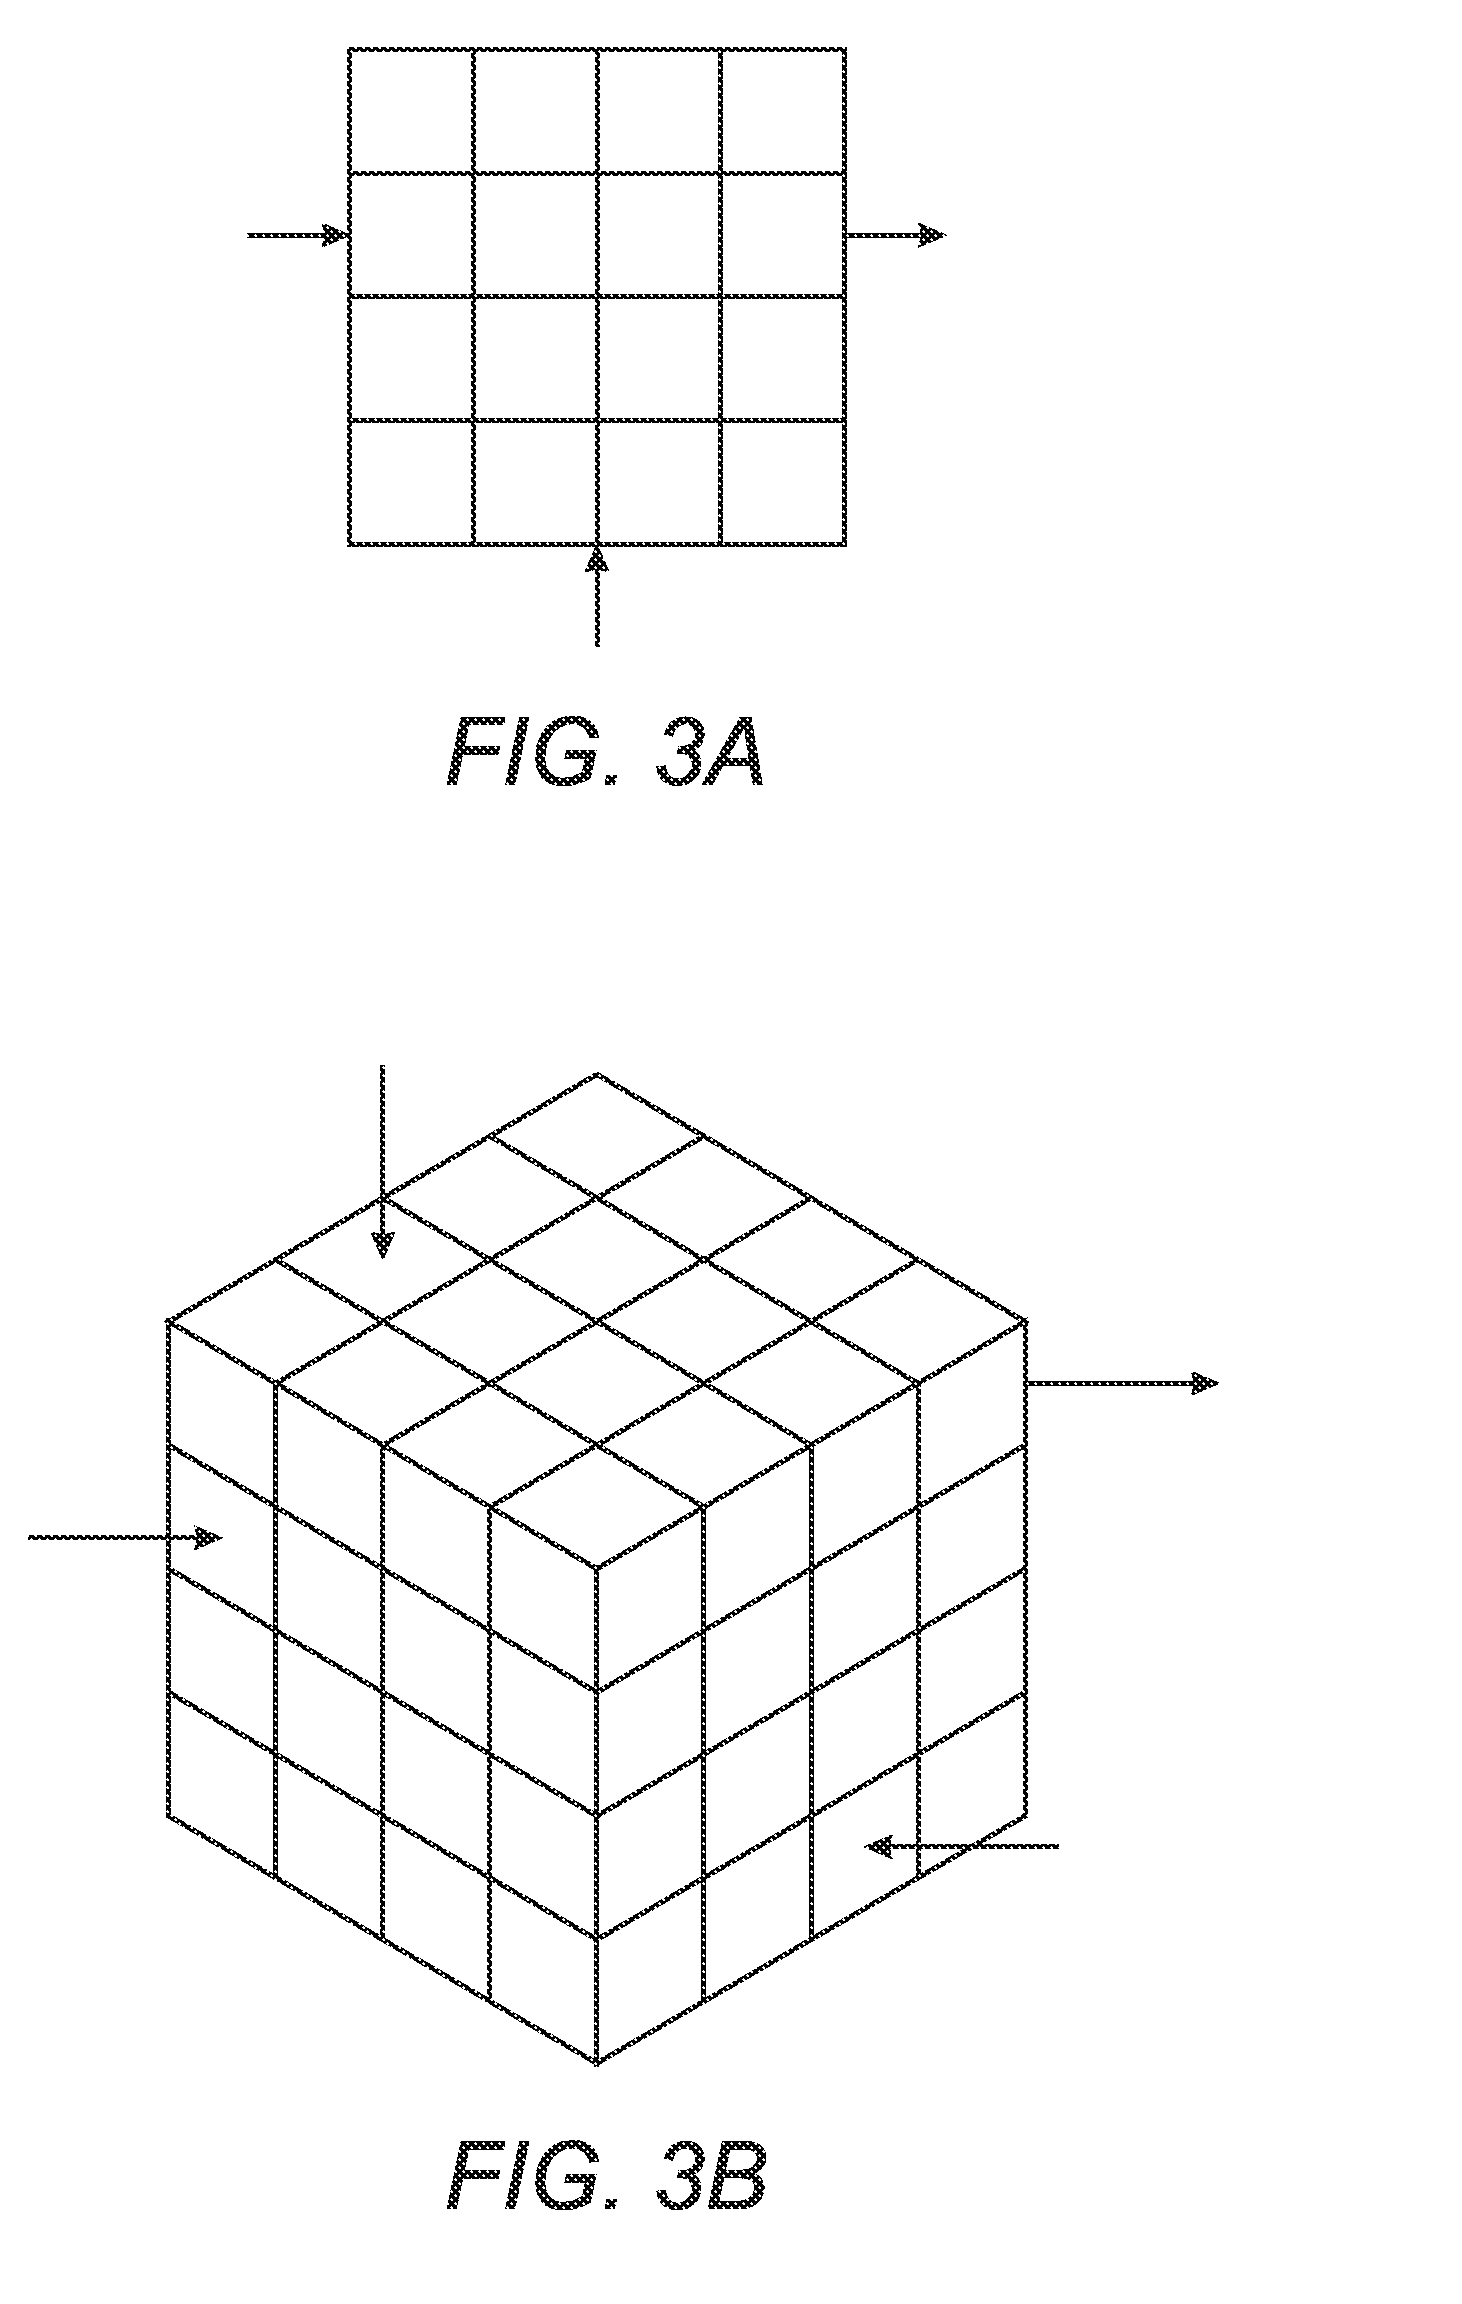 Method and system for imaging device characterization including look-up table construction via tensor decomposition